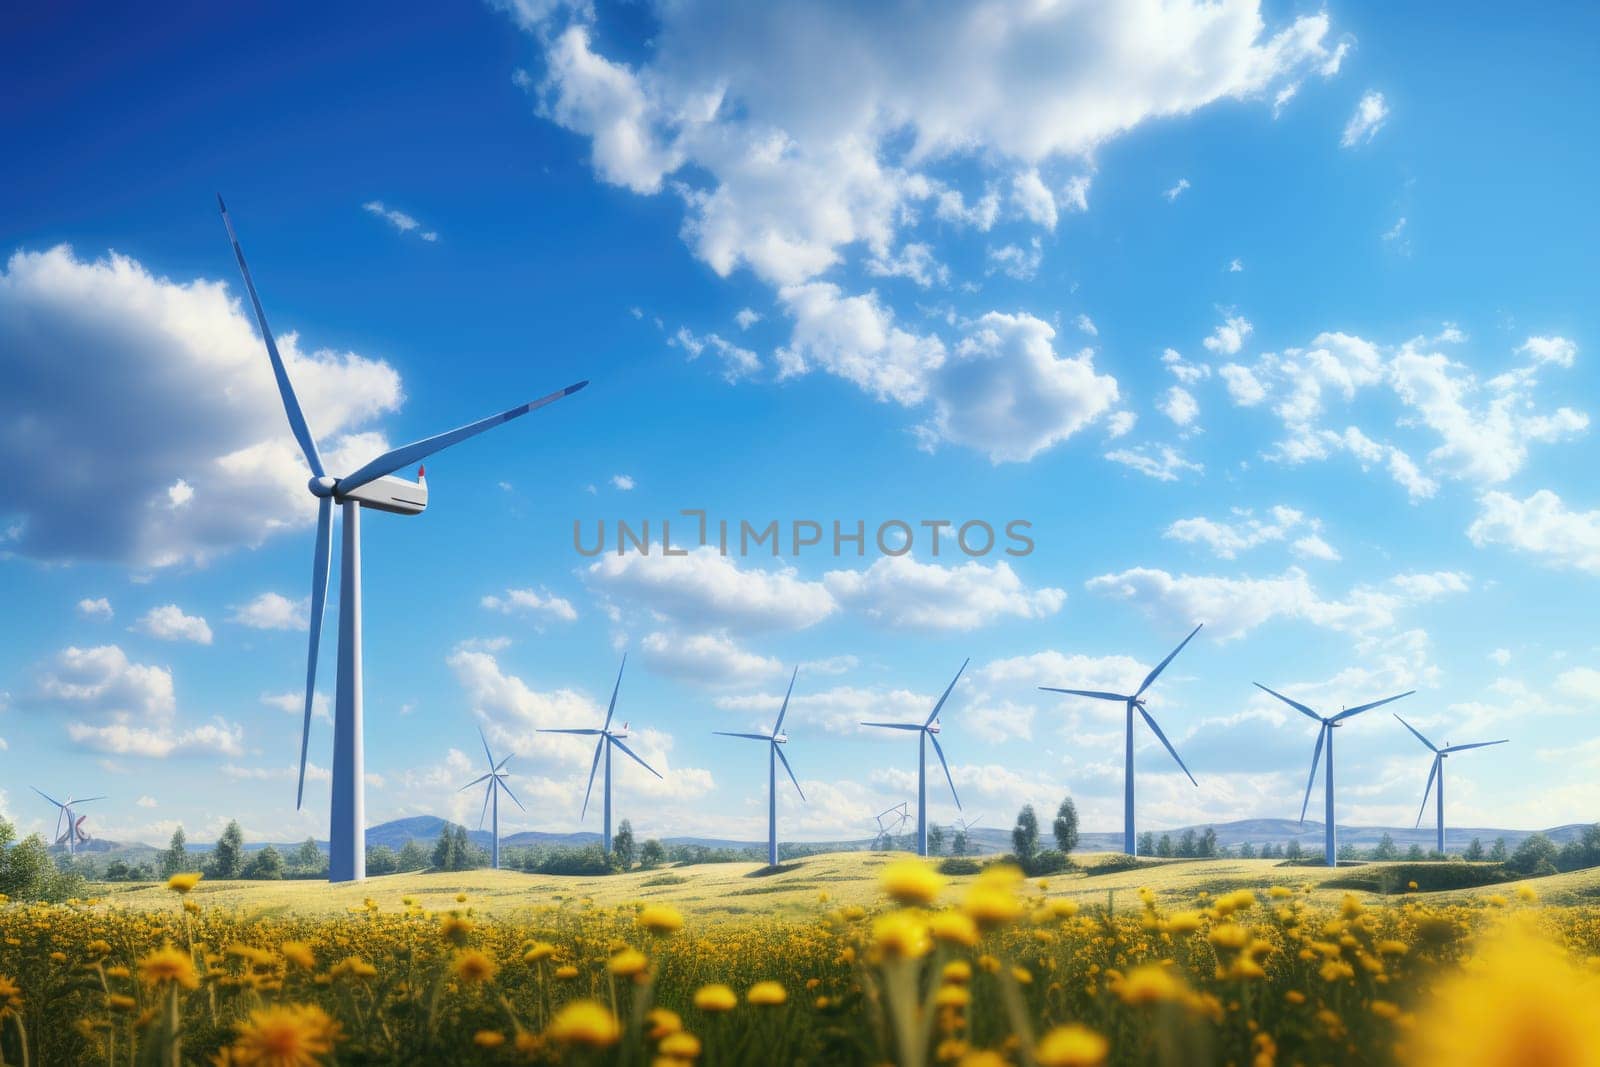 A group of windmills positioned alongside a vast expanse of grass and sunflowers, creating a visually striking landscape.